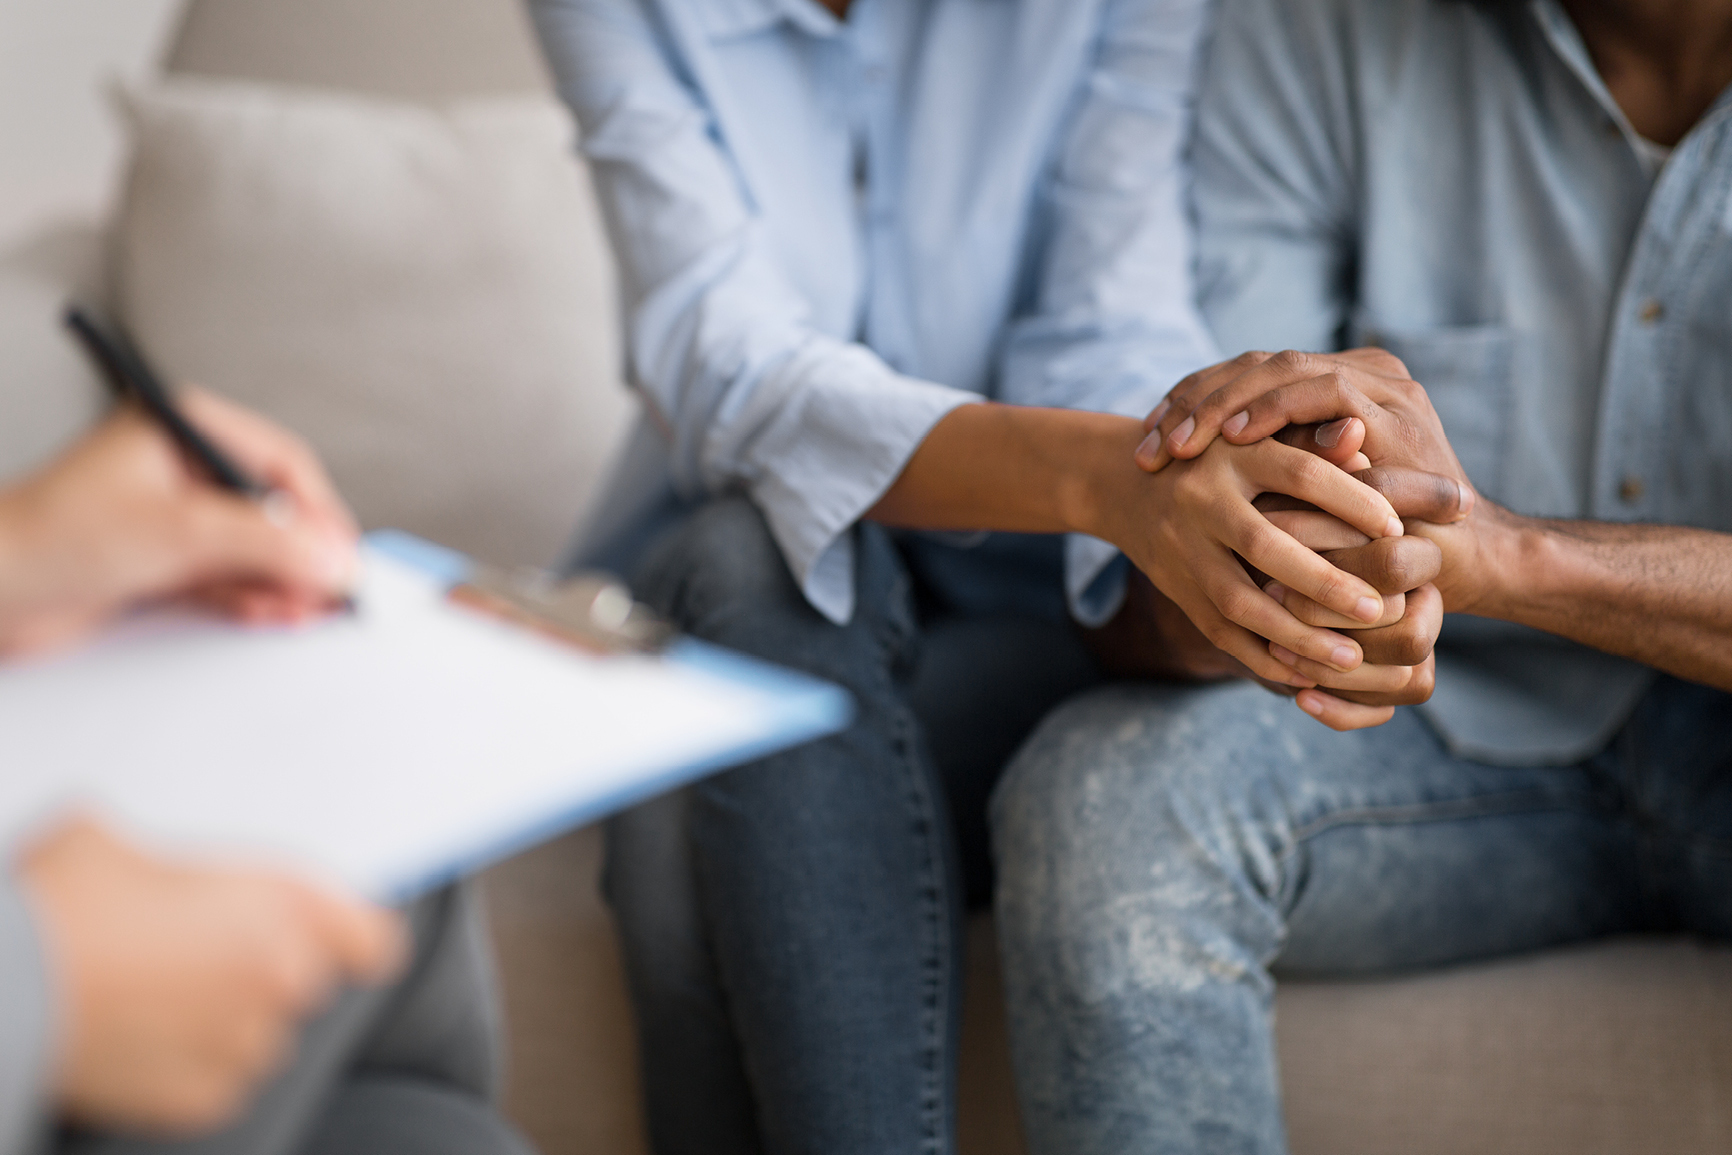 Couple holding hands during counseling session